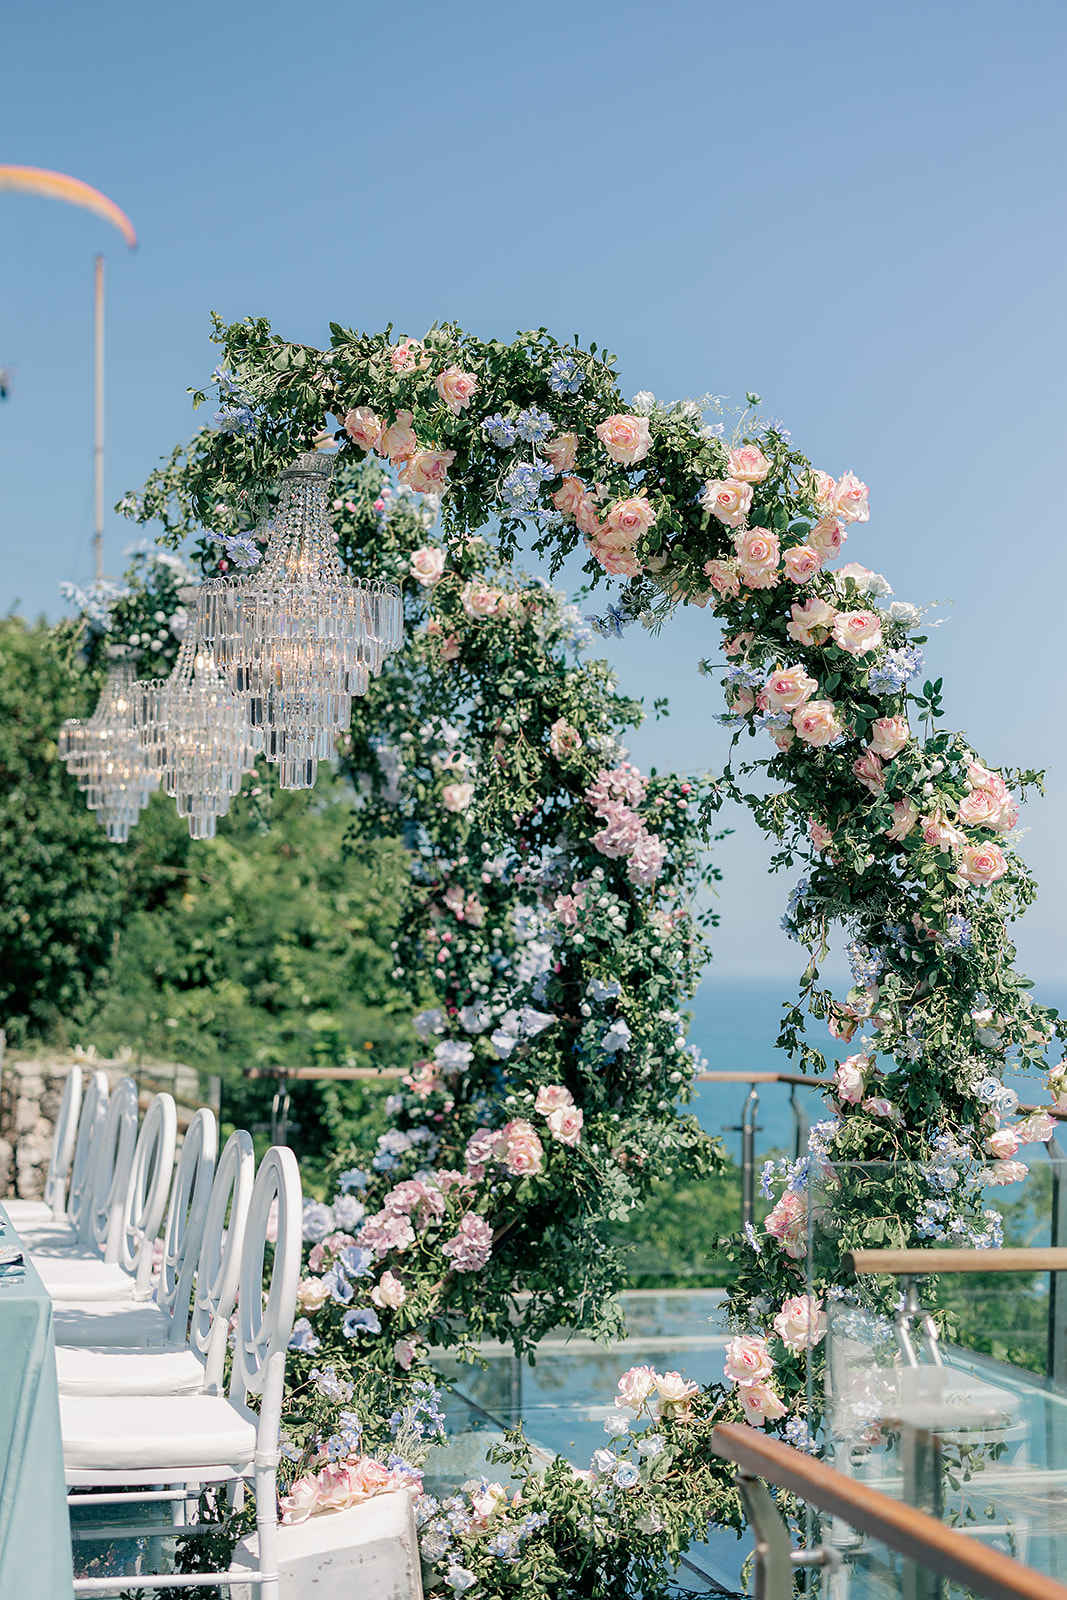 floral arches going over the intimate table setting at Tirtha, by the ocean in Uluwatu